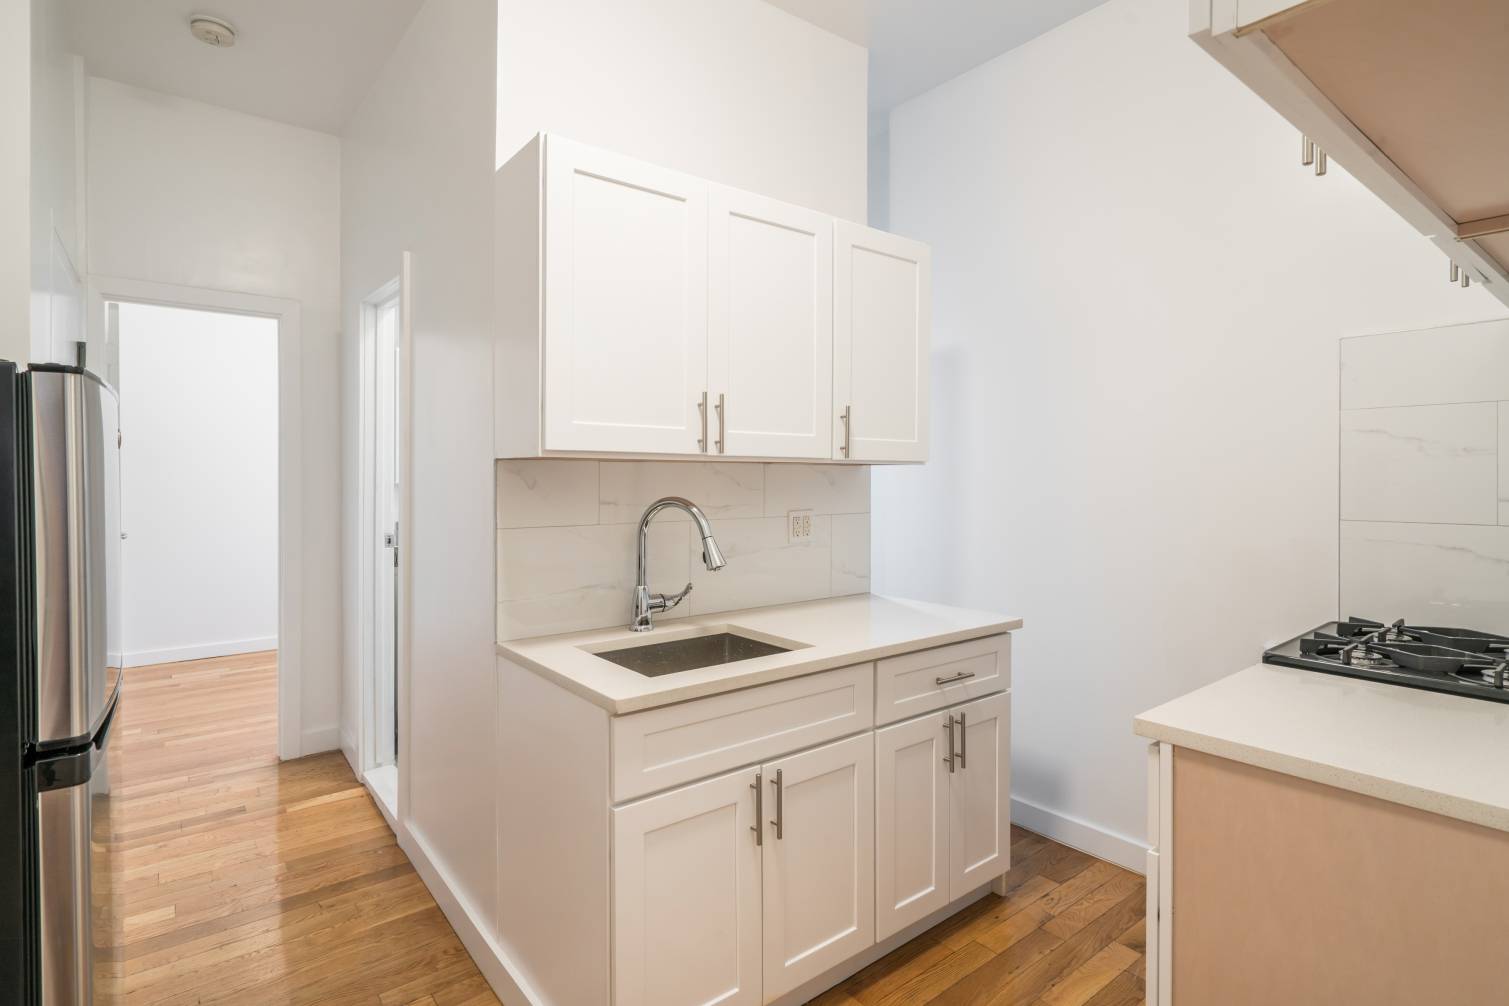 Newly Renovated 2 bedroom with 1 bath, located on Elizabeth Street in the heart of Nolita.